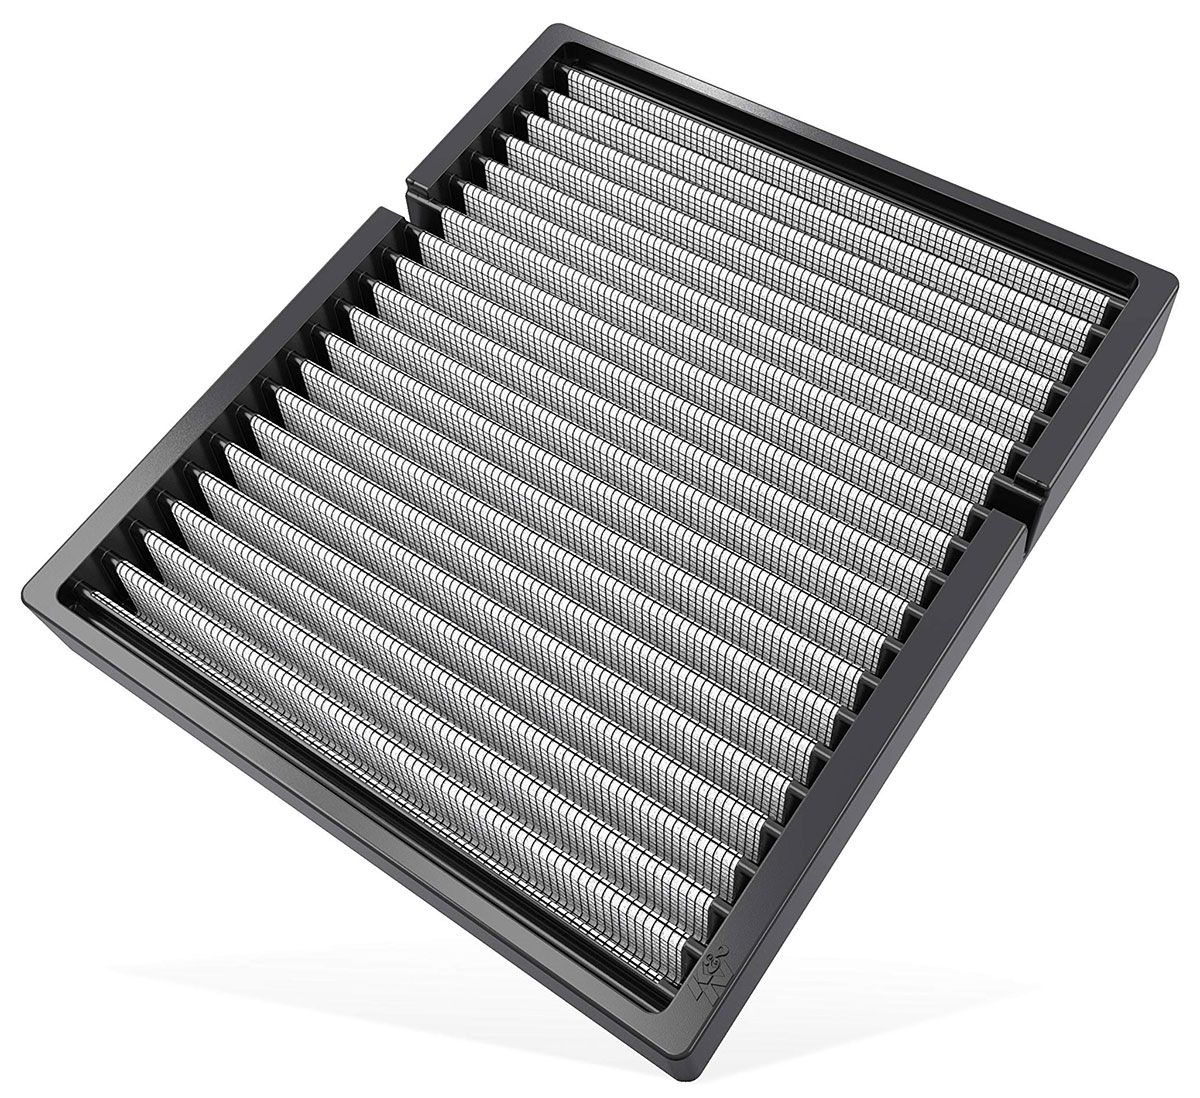 KNVF2054 - CABIN AIR FILTER, TOYOTA HILUX